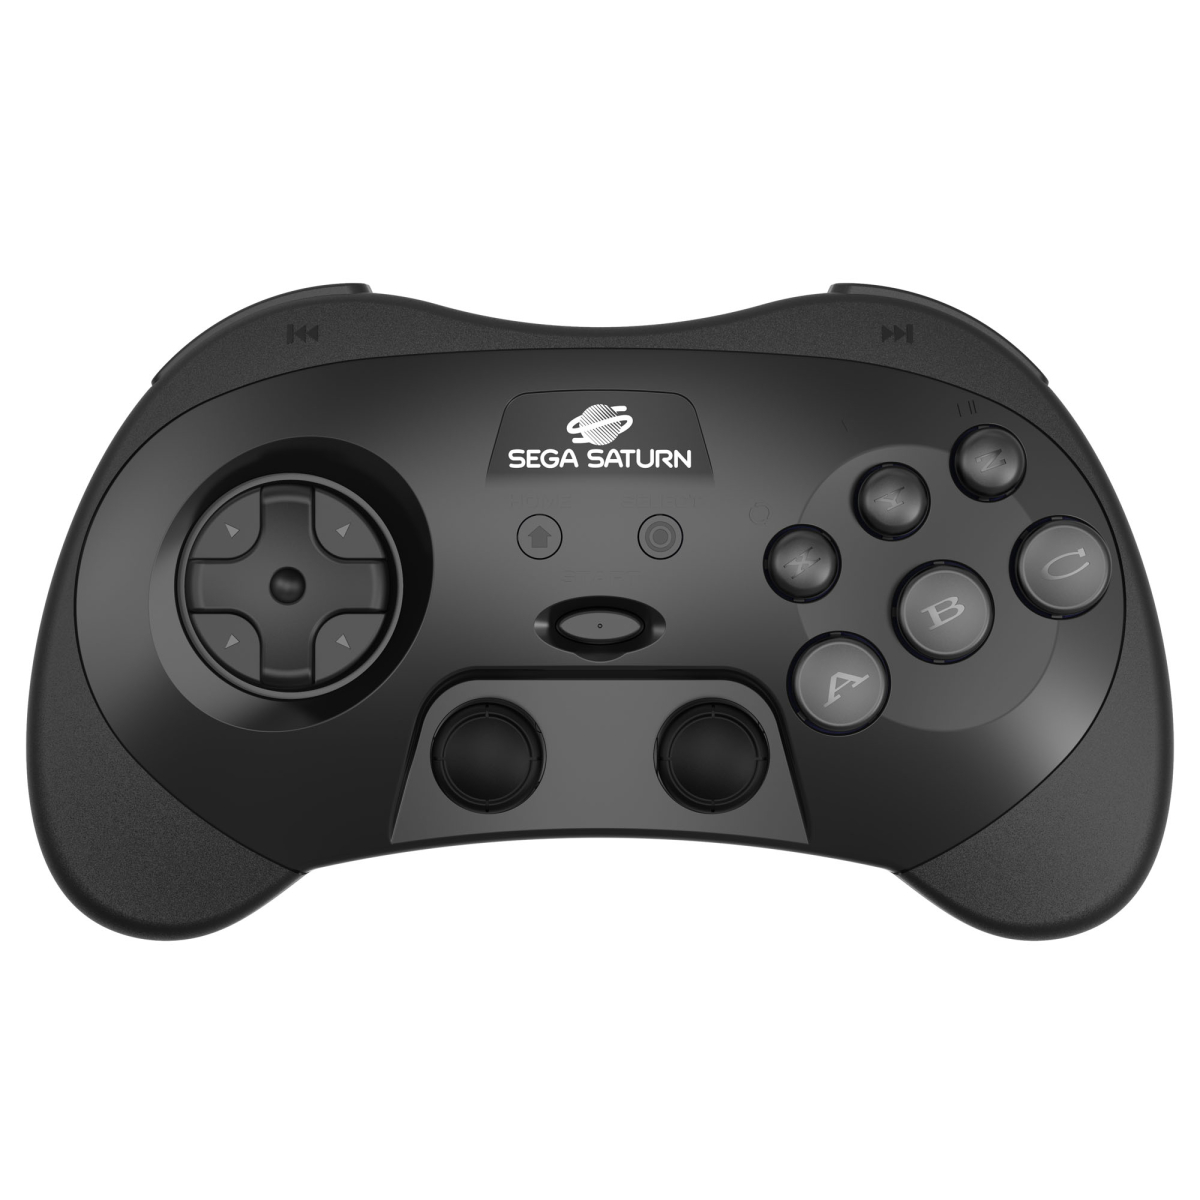 Retro-Bit Sega Saturn 2.4GHz Wireless Pro Controller Black - Spel & Sånt:  The video game store with the happiest customers